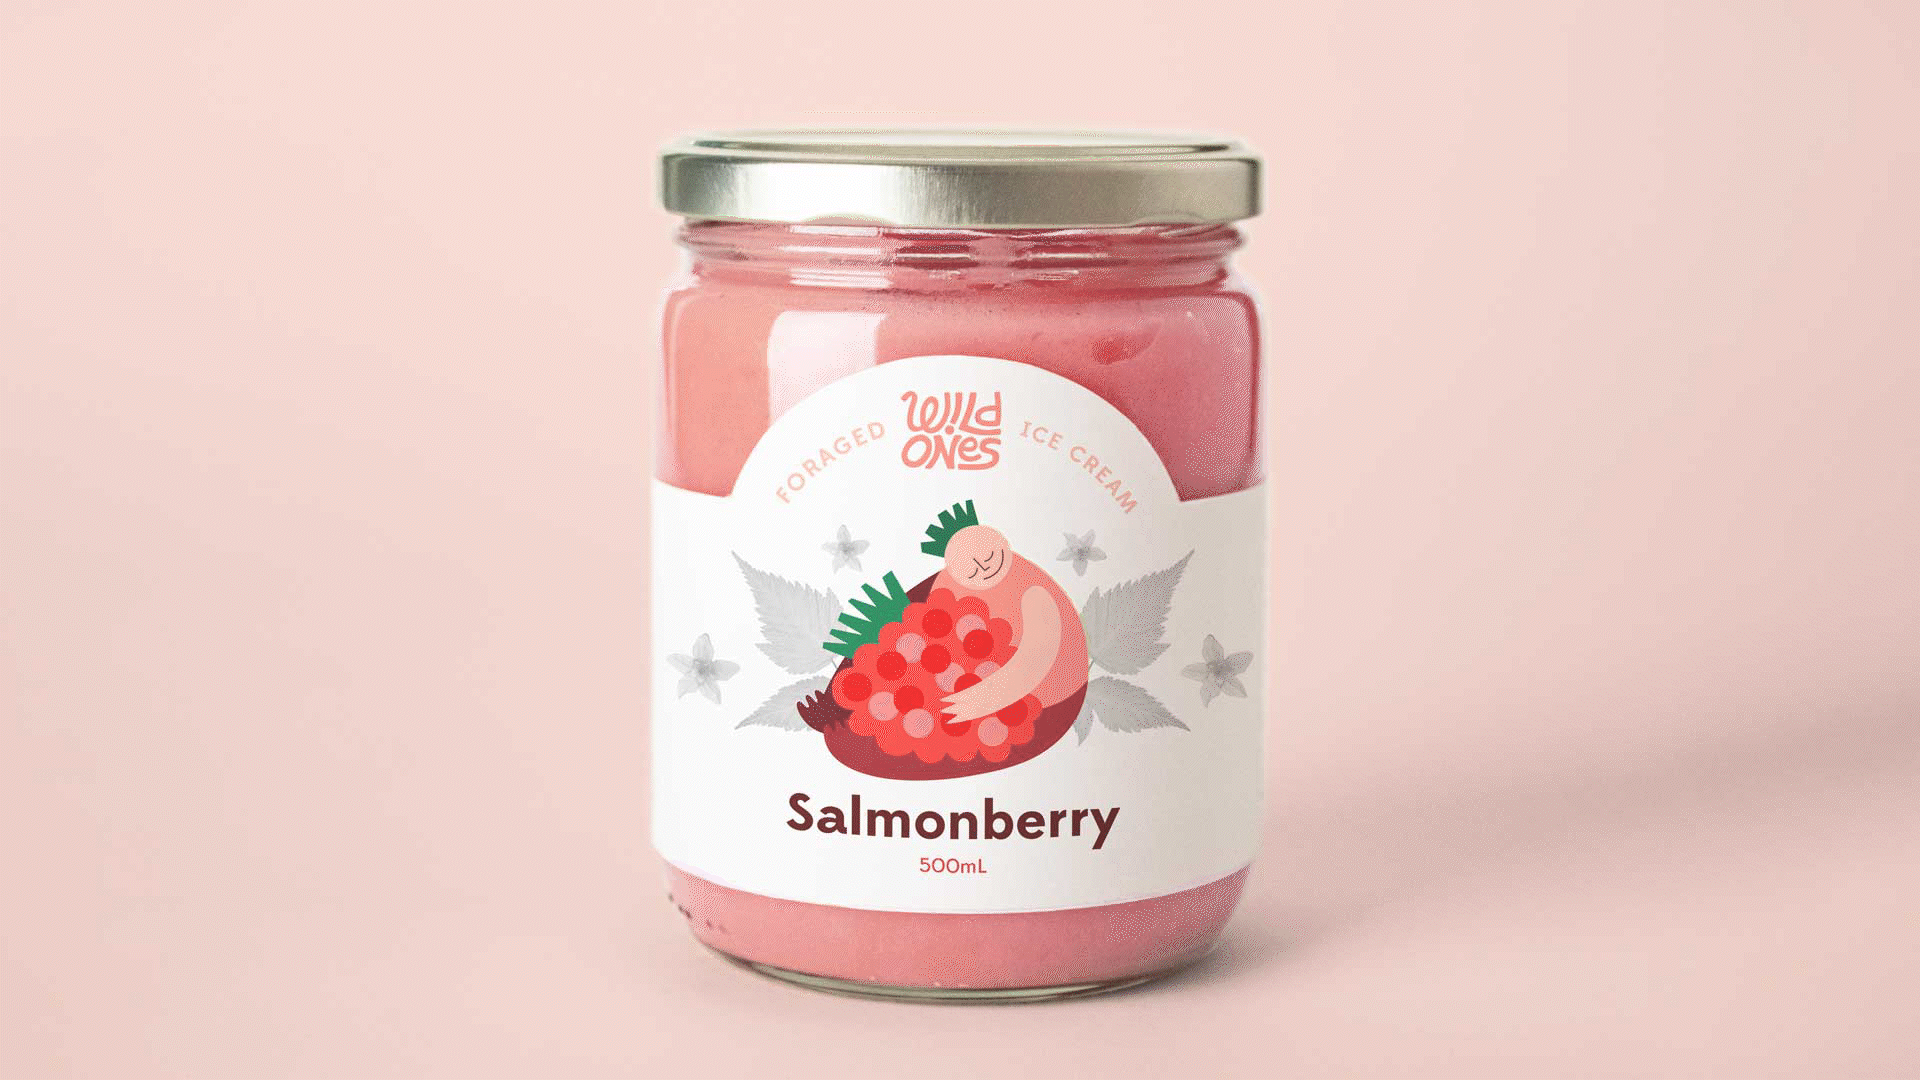 An image of ice cream packaging on a glass jar of pink salmonberry flavoured ice cream. The packaging has black and white images of salmonberry leaves and flowers, and an illustration of a sprite hugging a salmonberry.